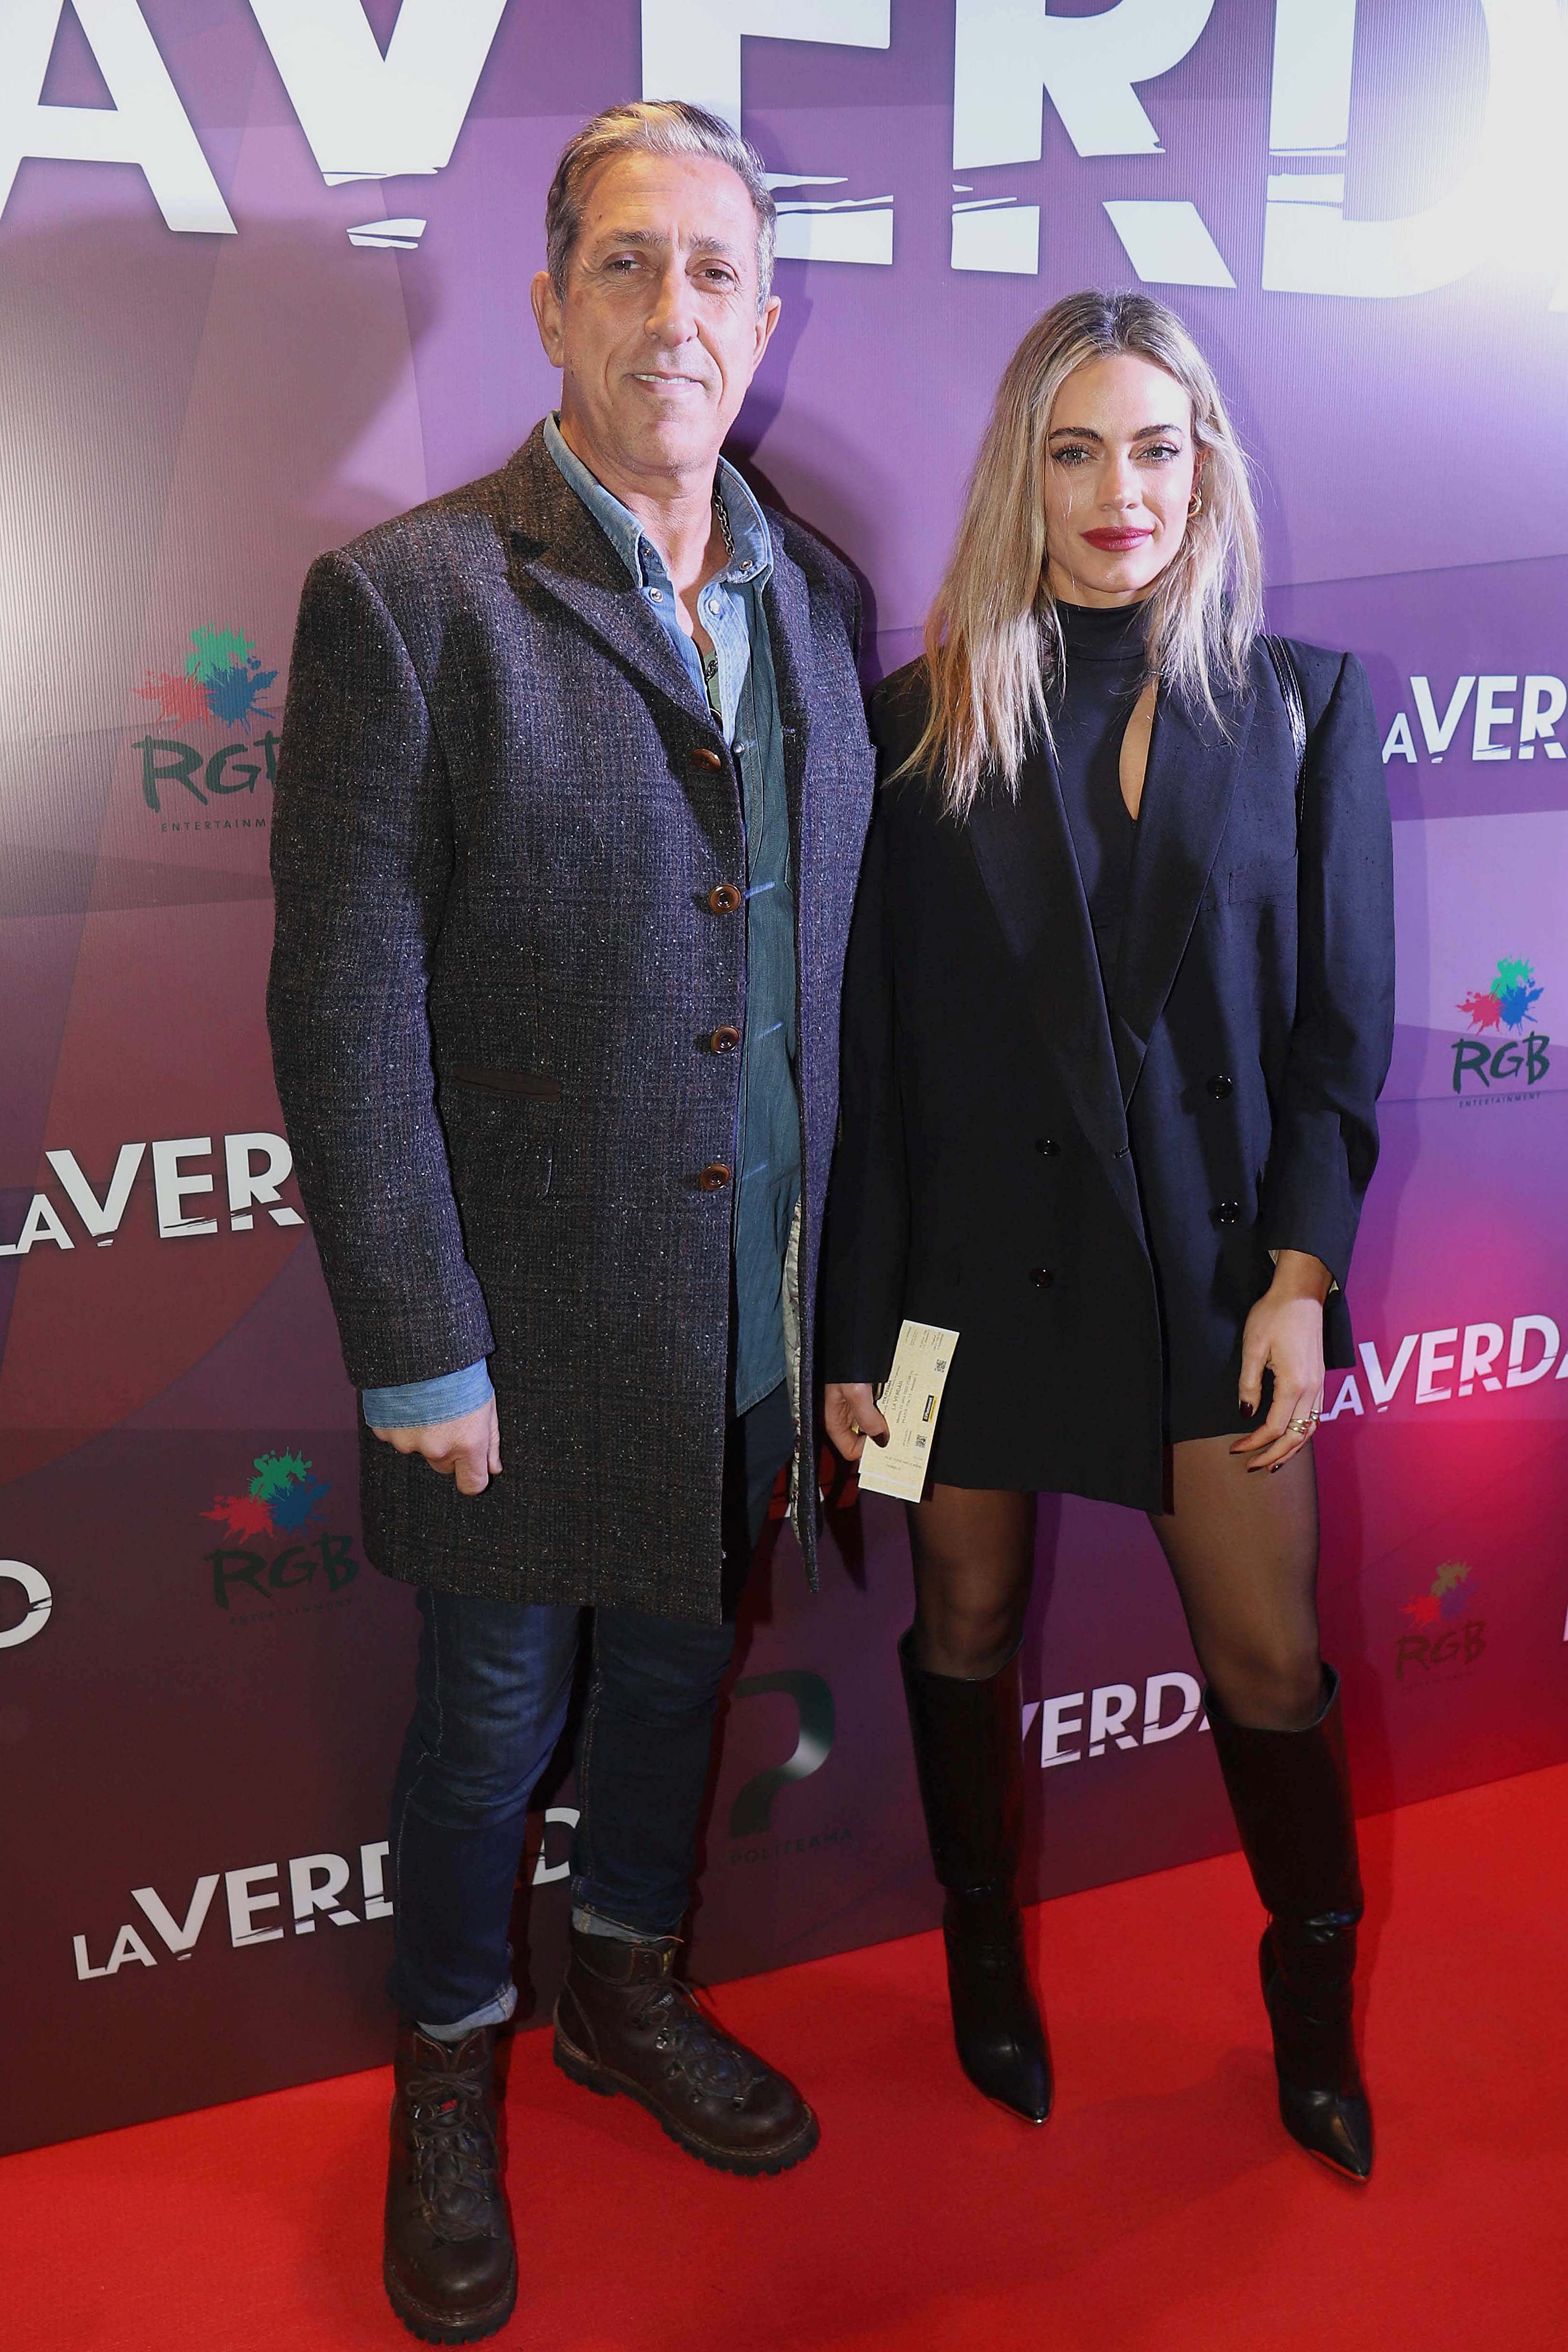 El Turco Naim and Emiia Attías, one of the celebrity couples who attended the event